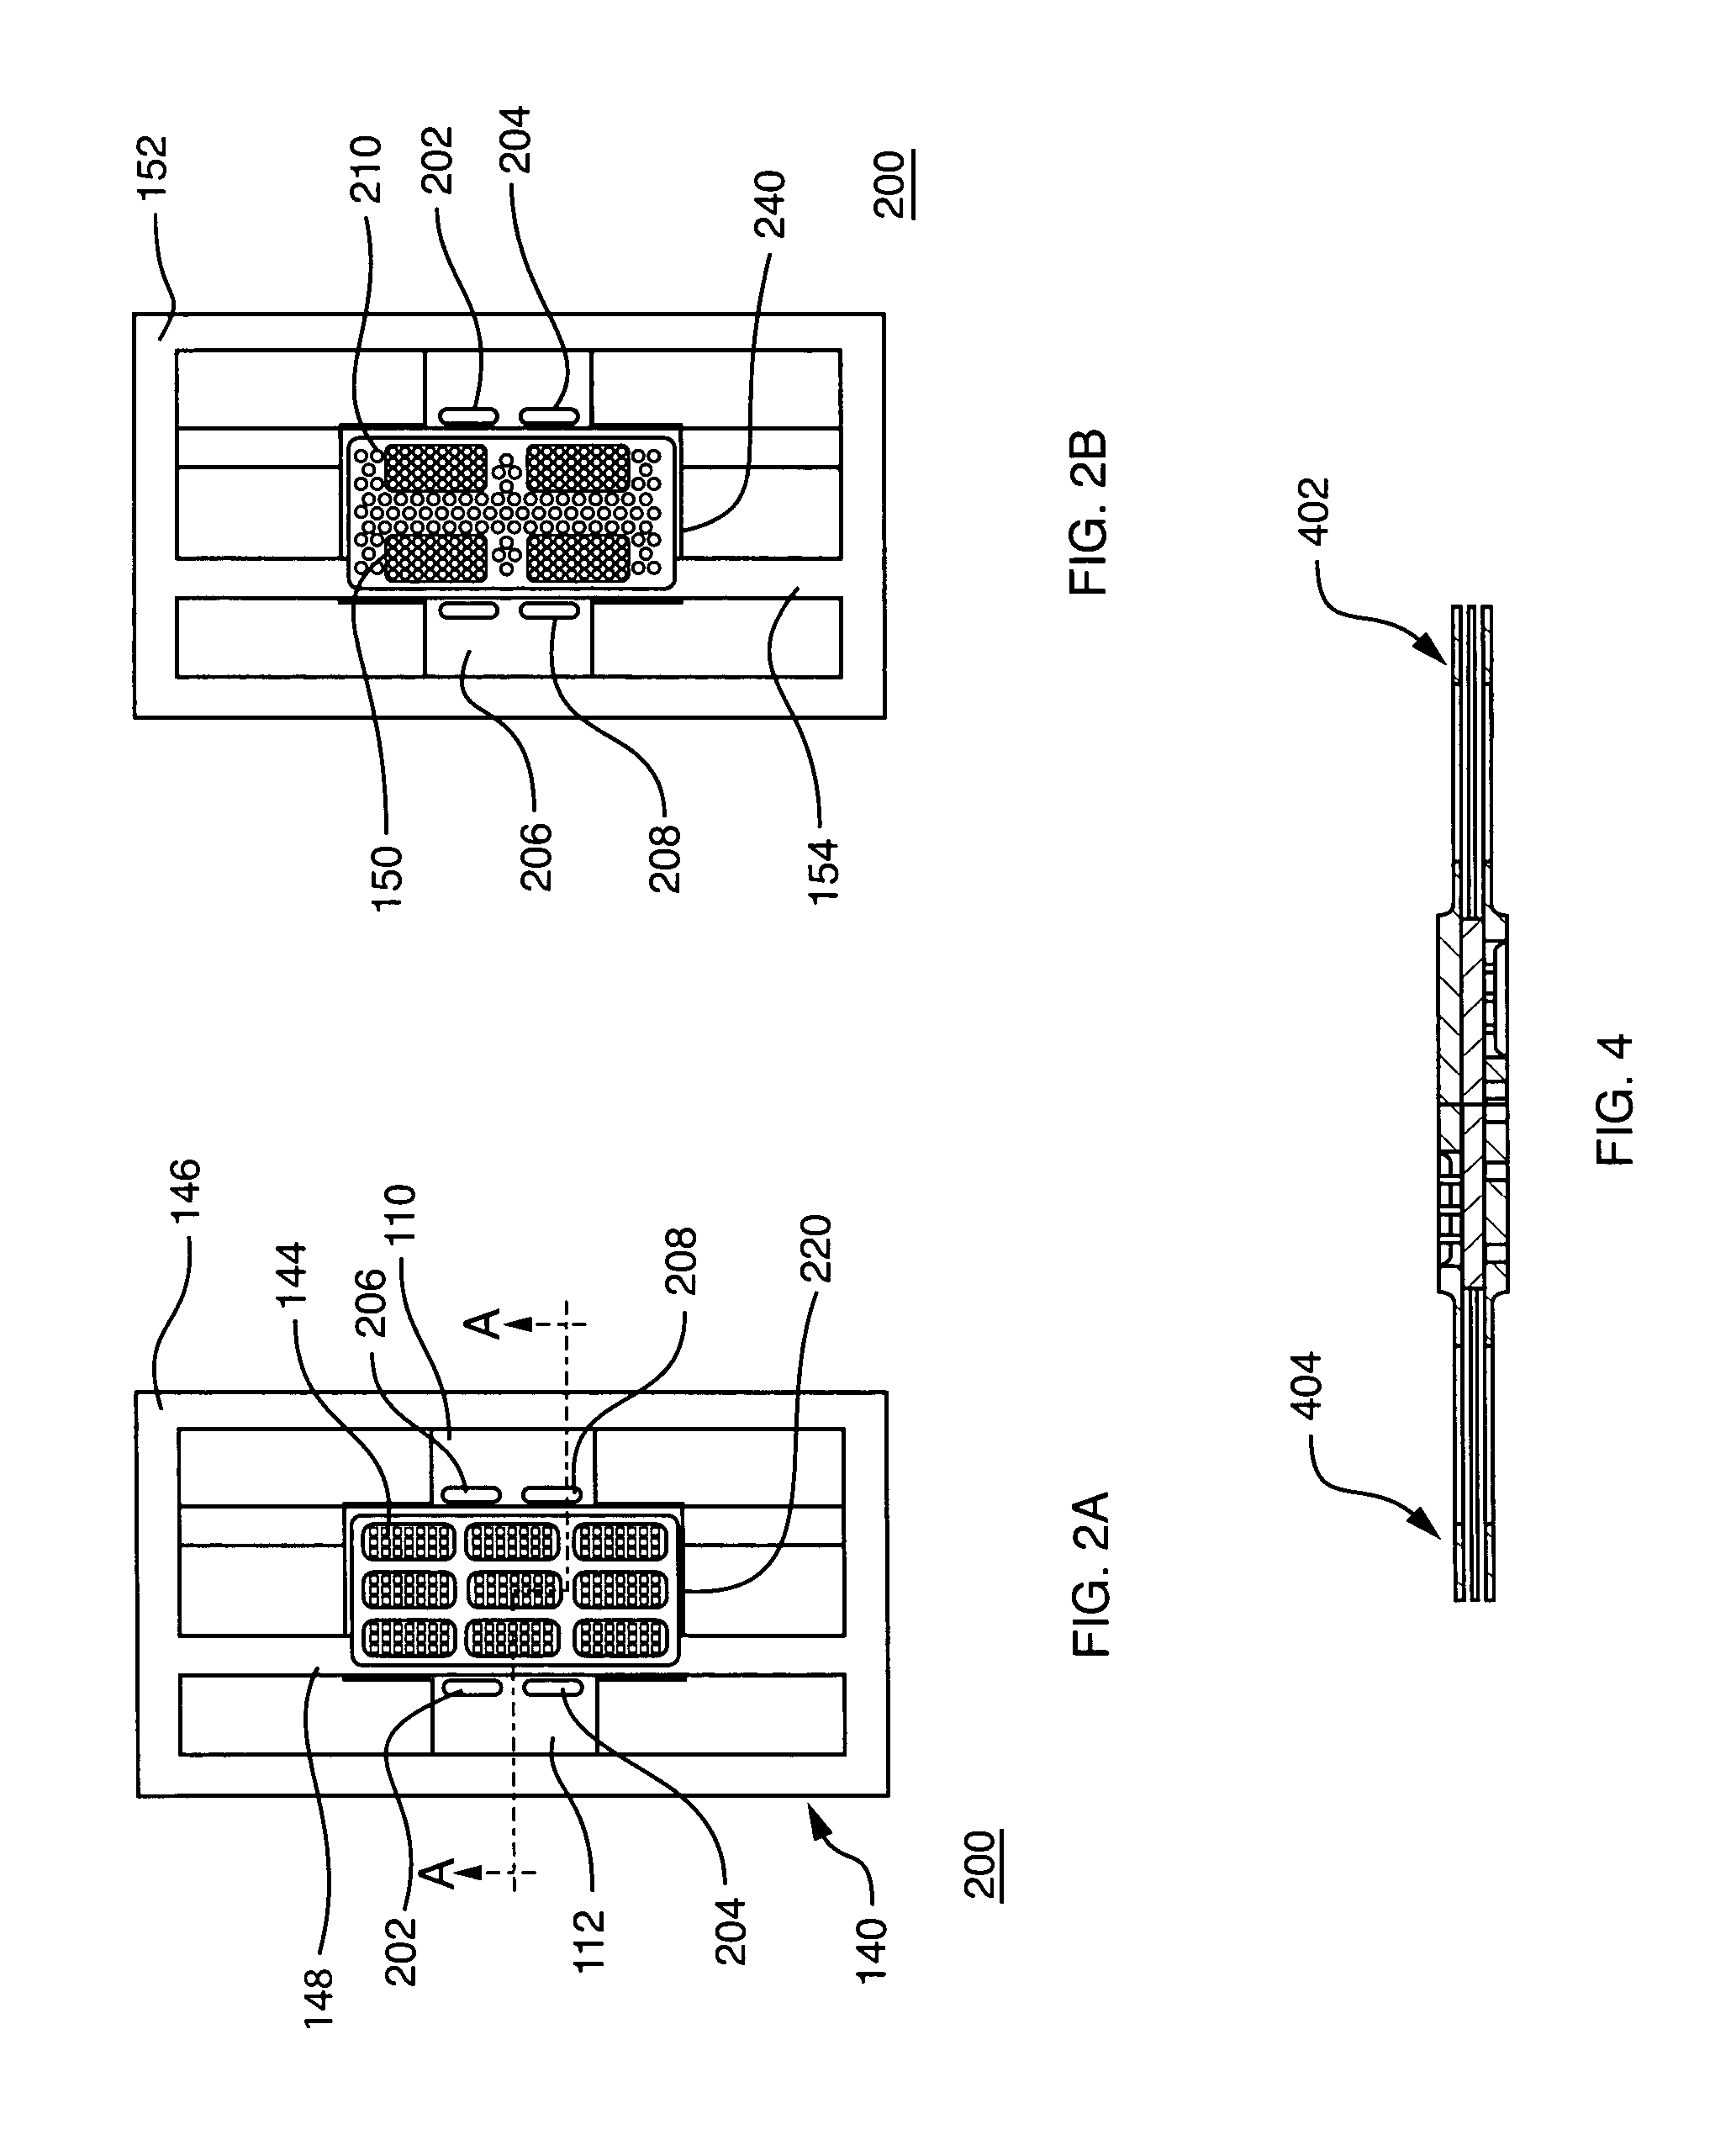 Method of manufacturing a fuel cell array and a related array